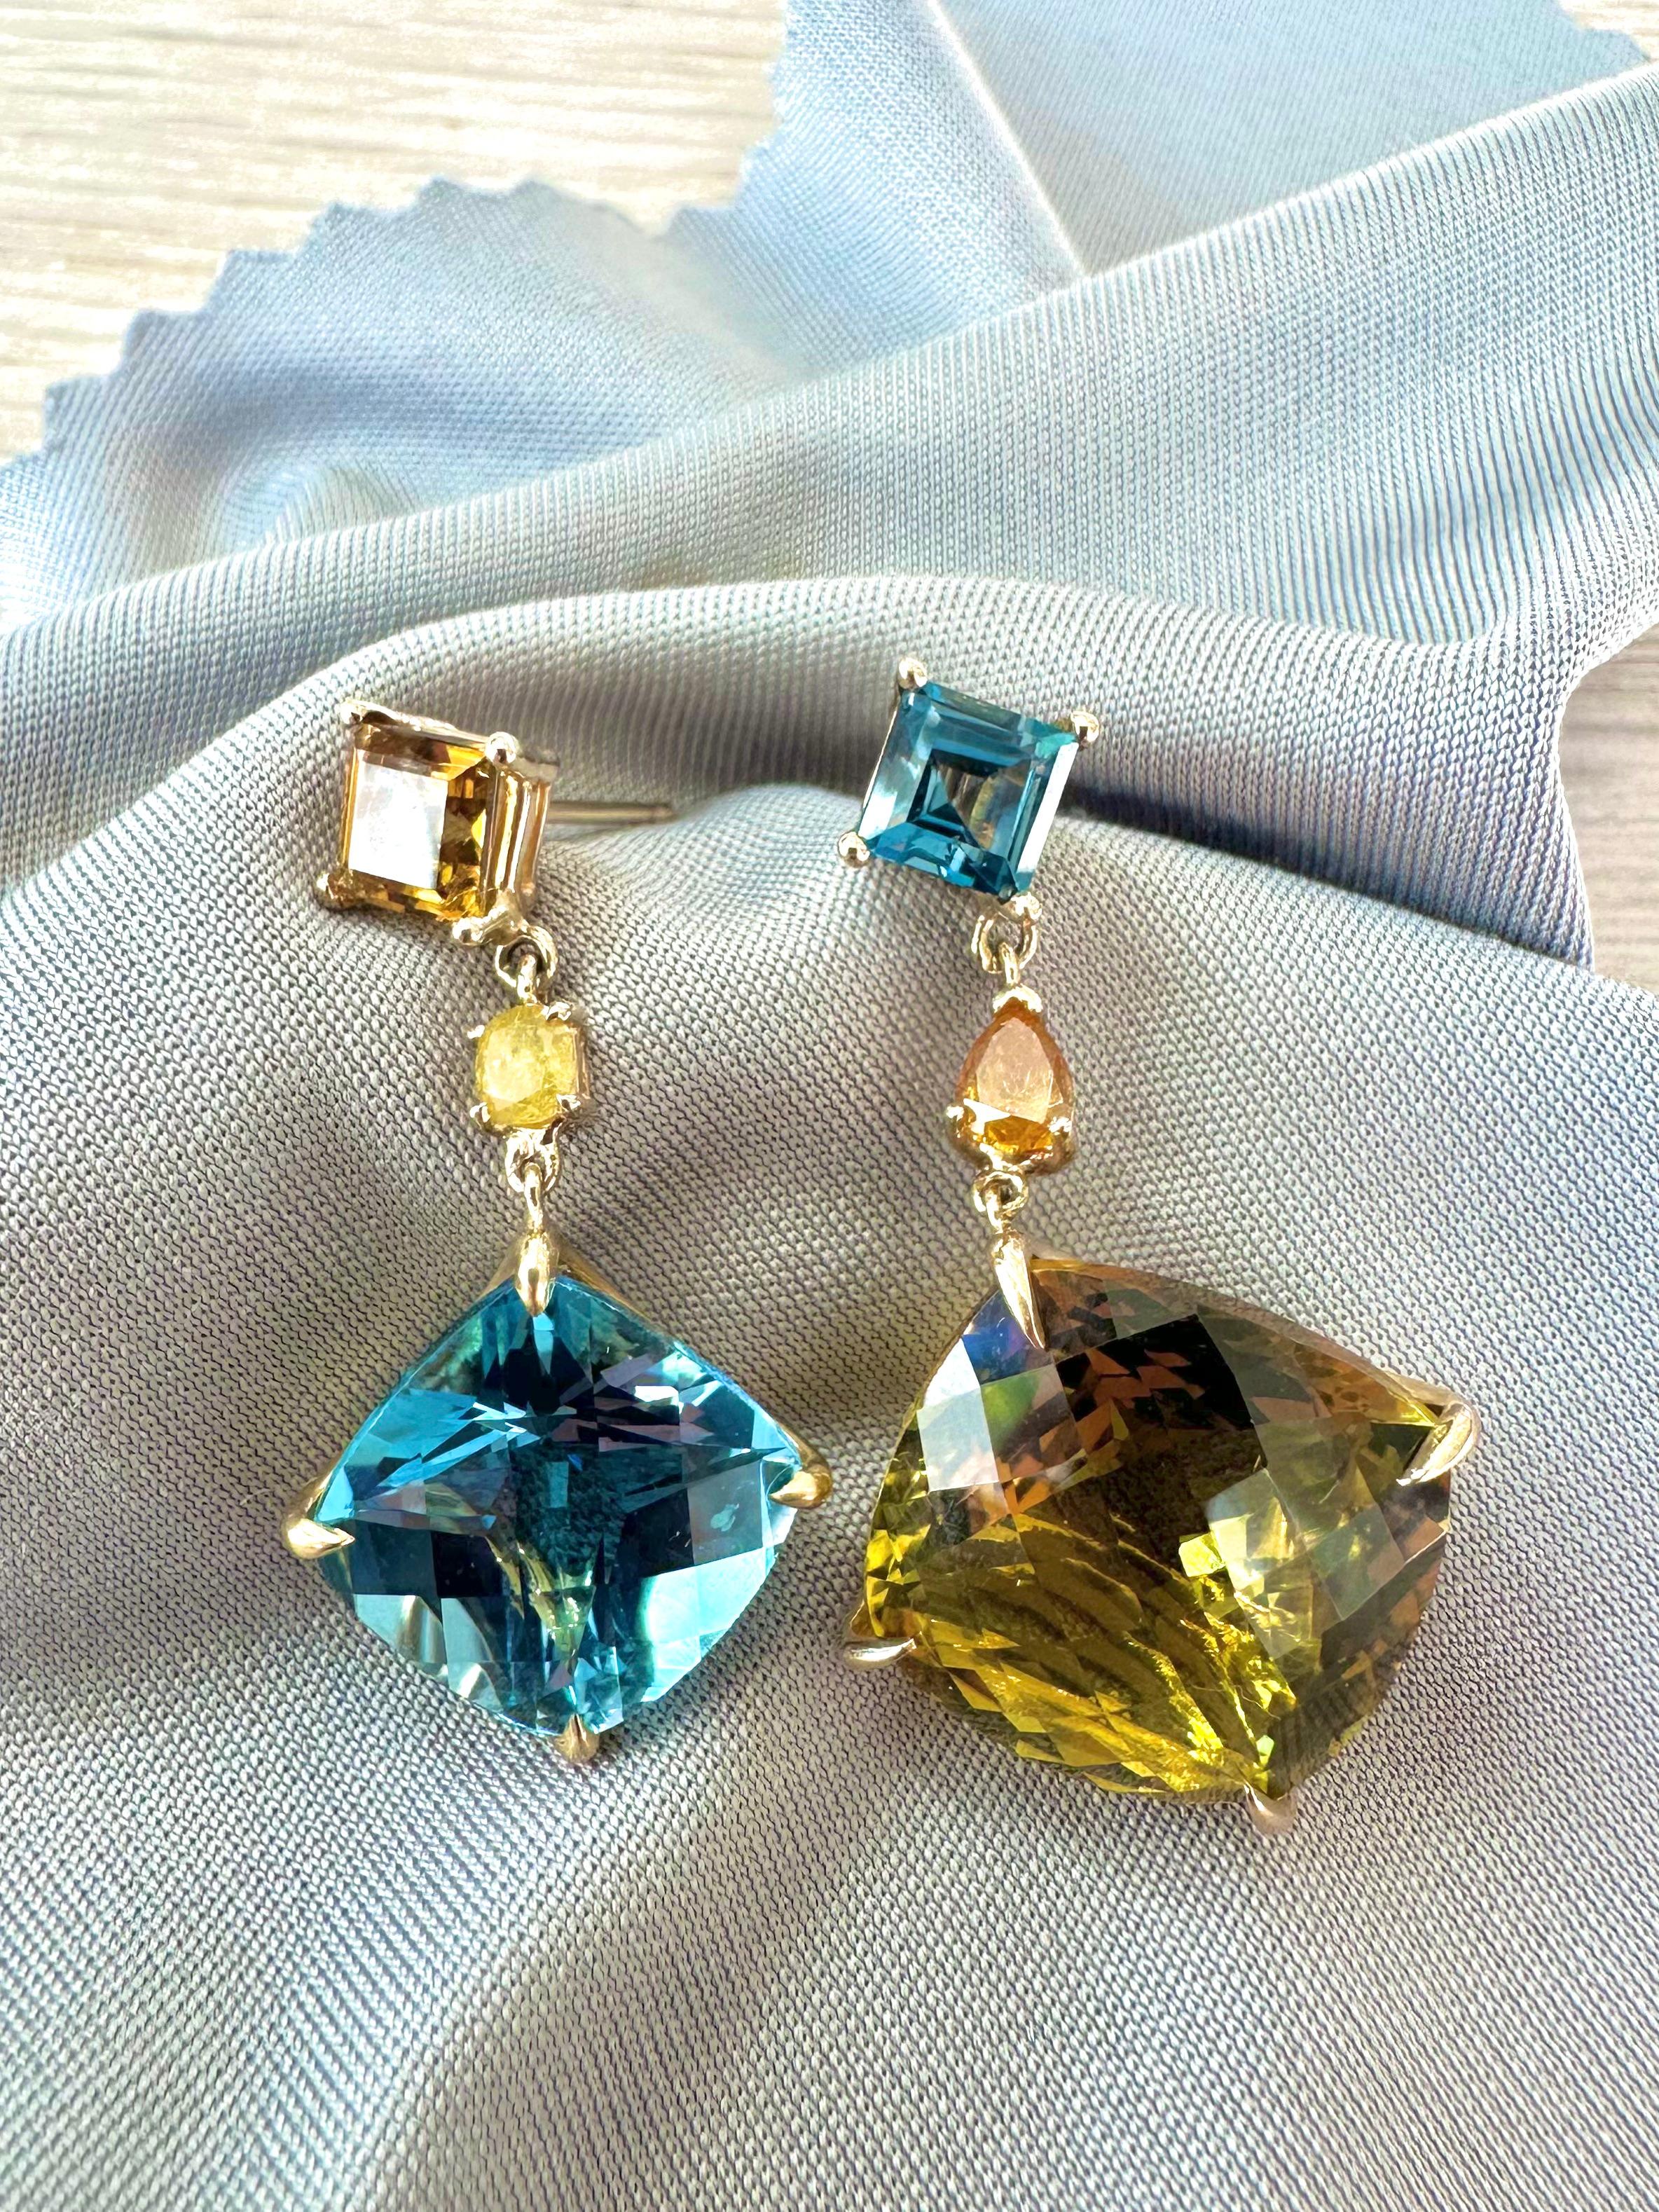 Citrine Topaz Yellow Diamond 18k Gold Drop Earrings by Kristin Hanson. Evening Primrose earrings are designed to accentuate individuality with magnificent shades of golden citrine and London blue topaz. Delicate yet strong, these drops sparkle in